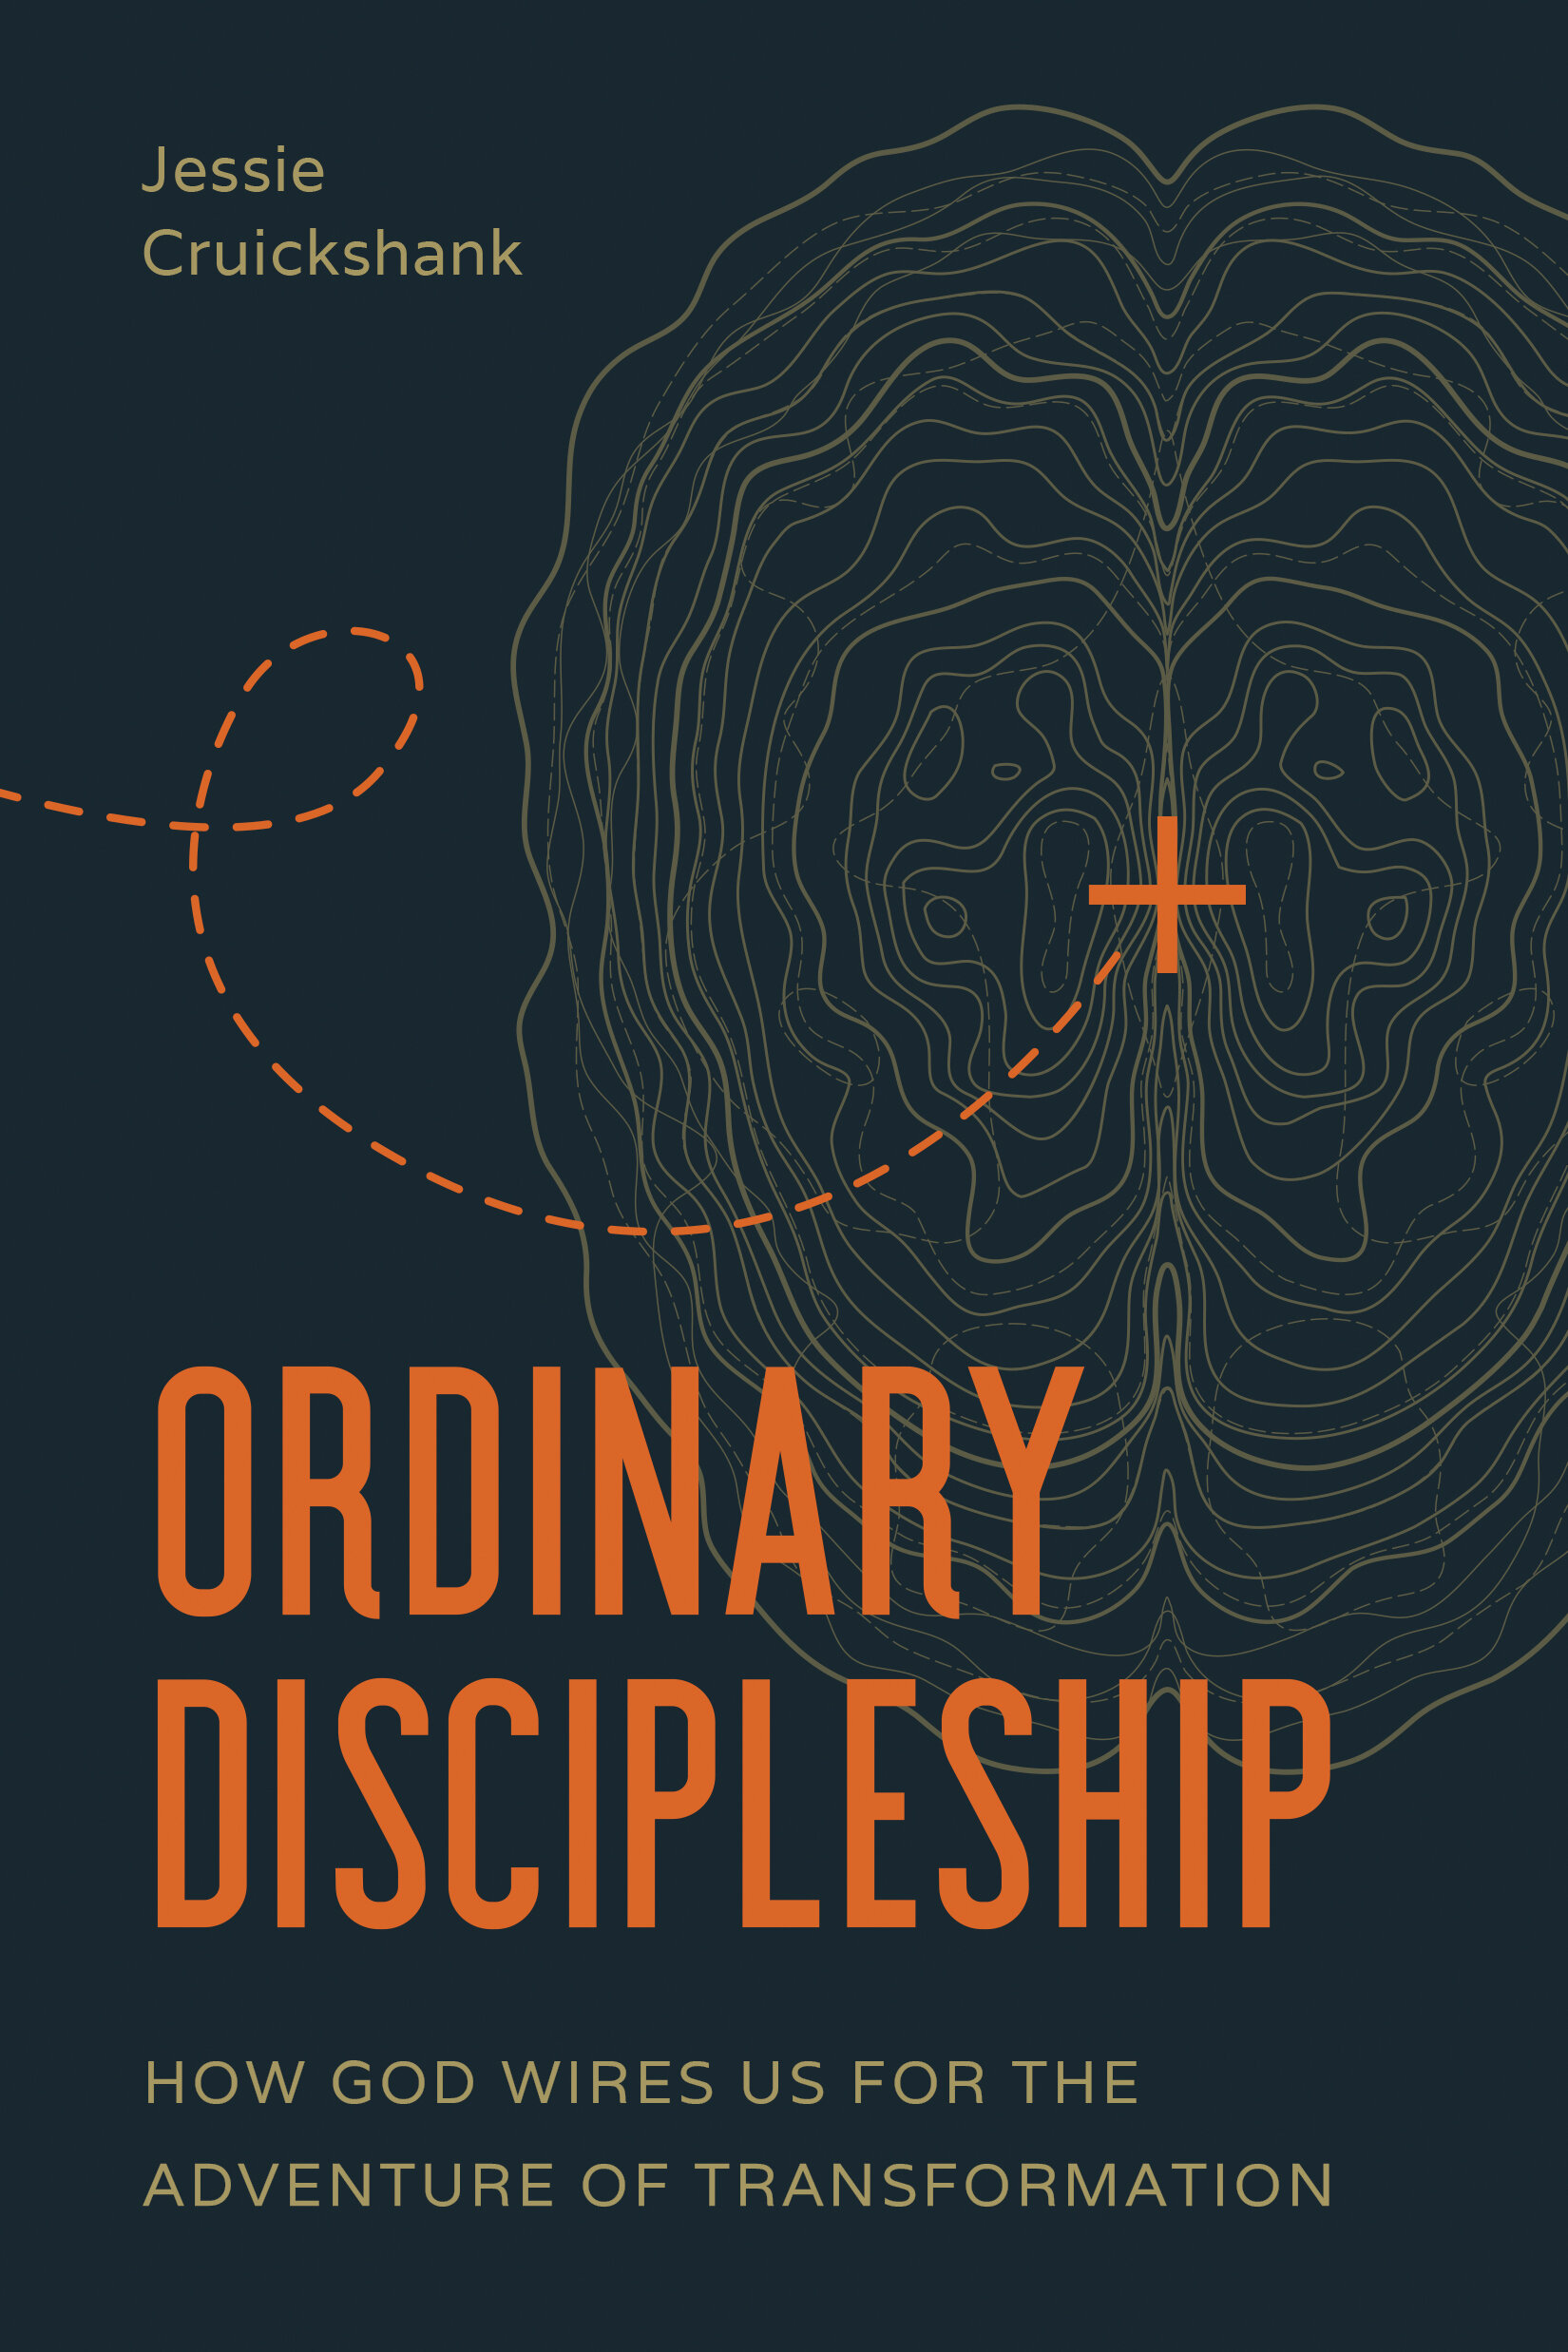 Ordinary Discipleship: How God Wires Us for the Adventure of Transformation